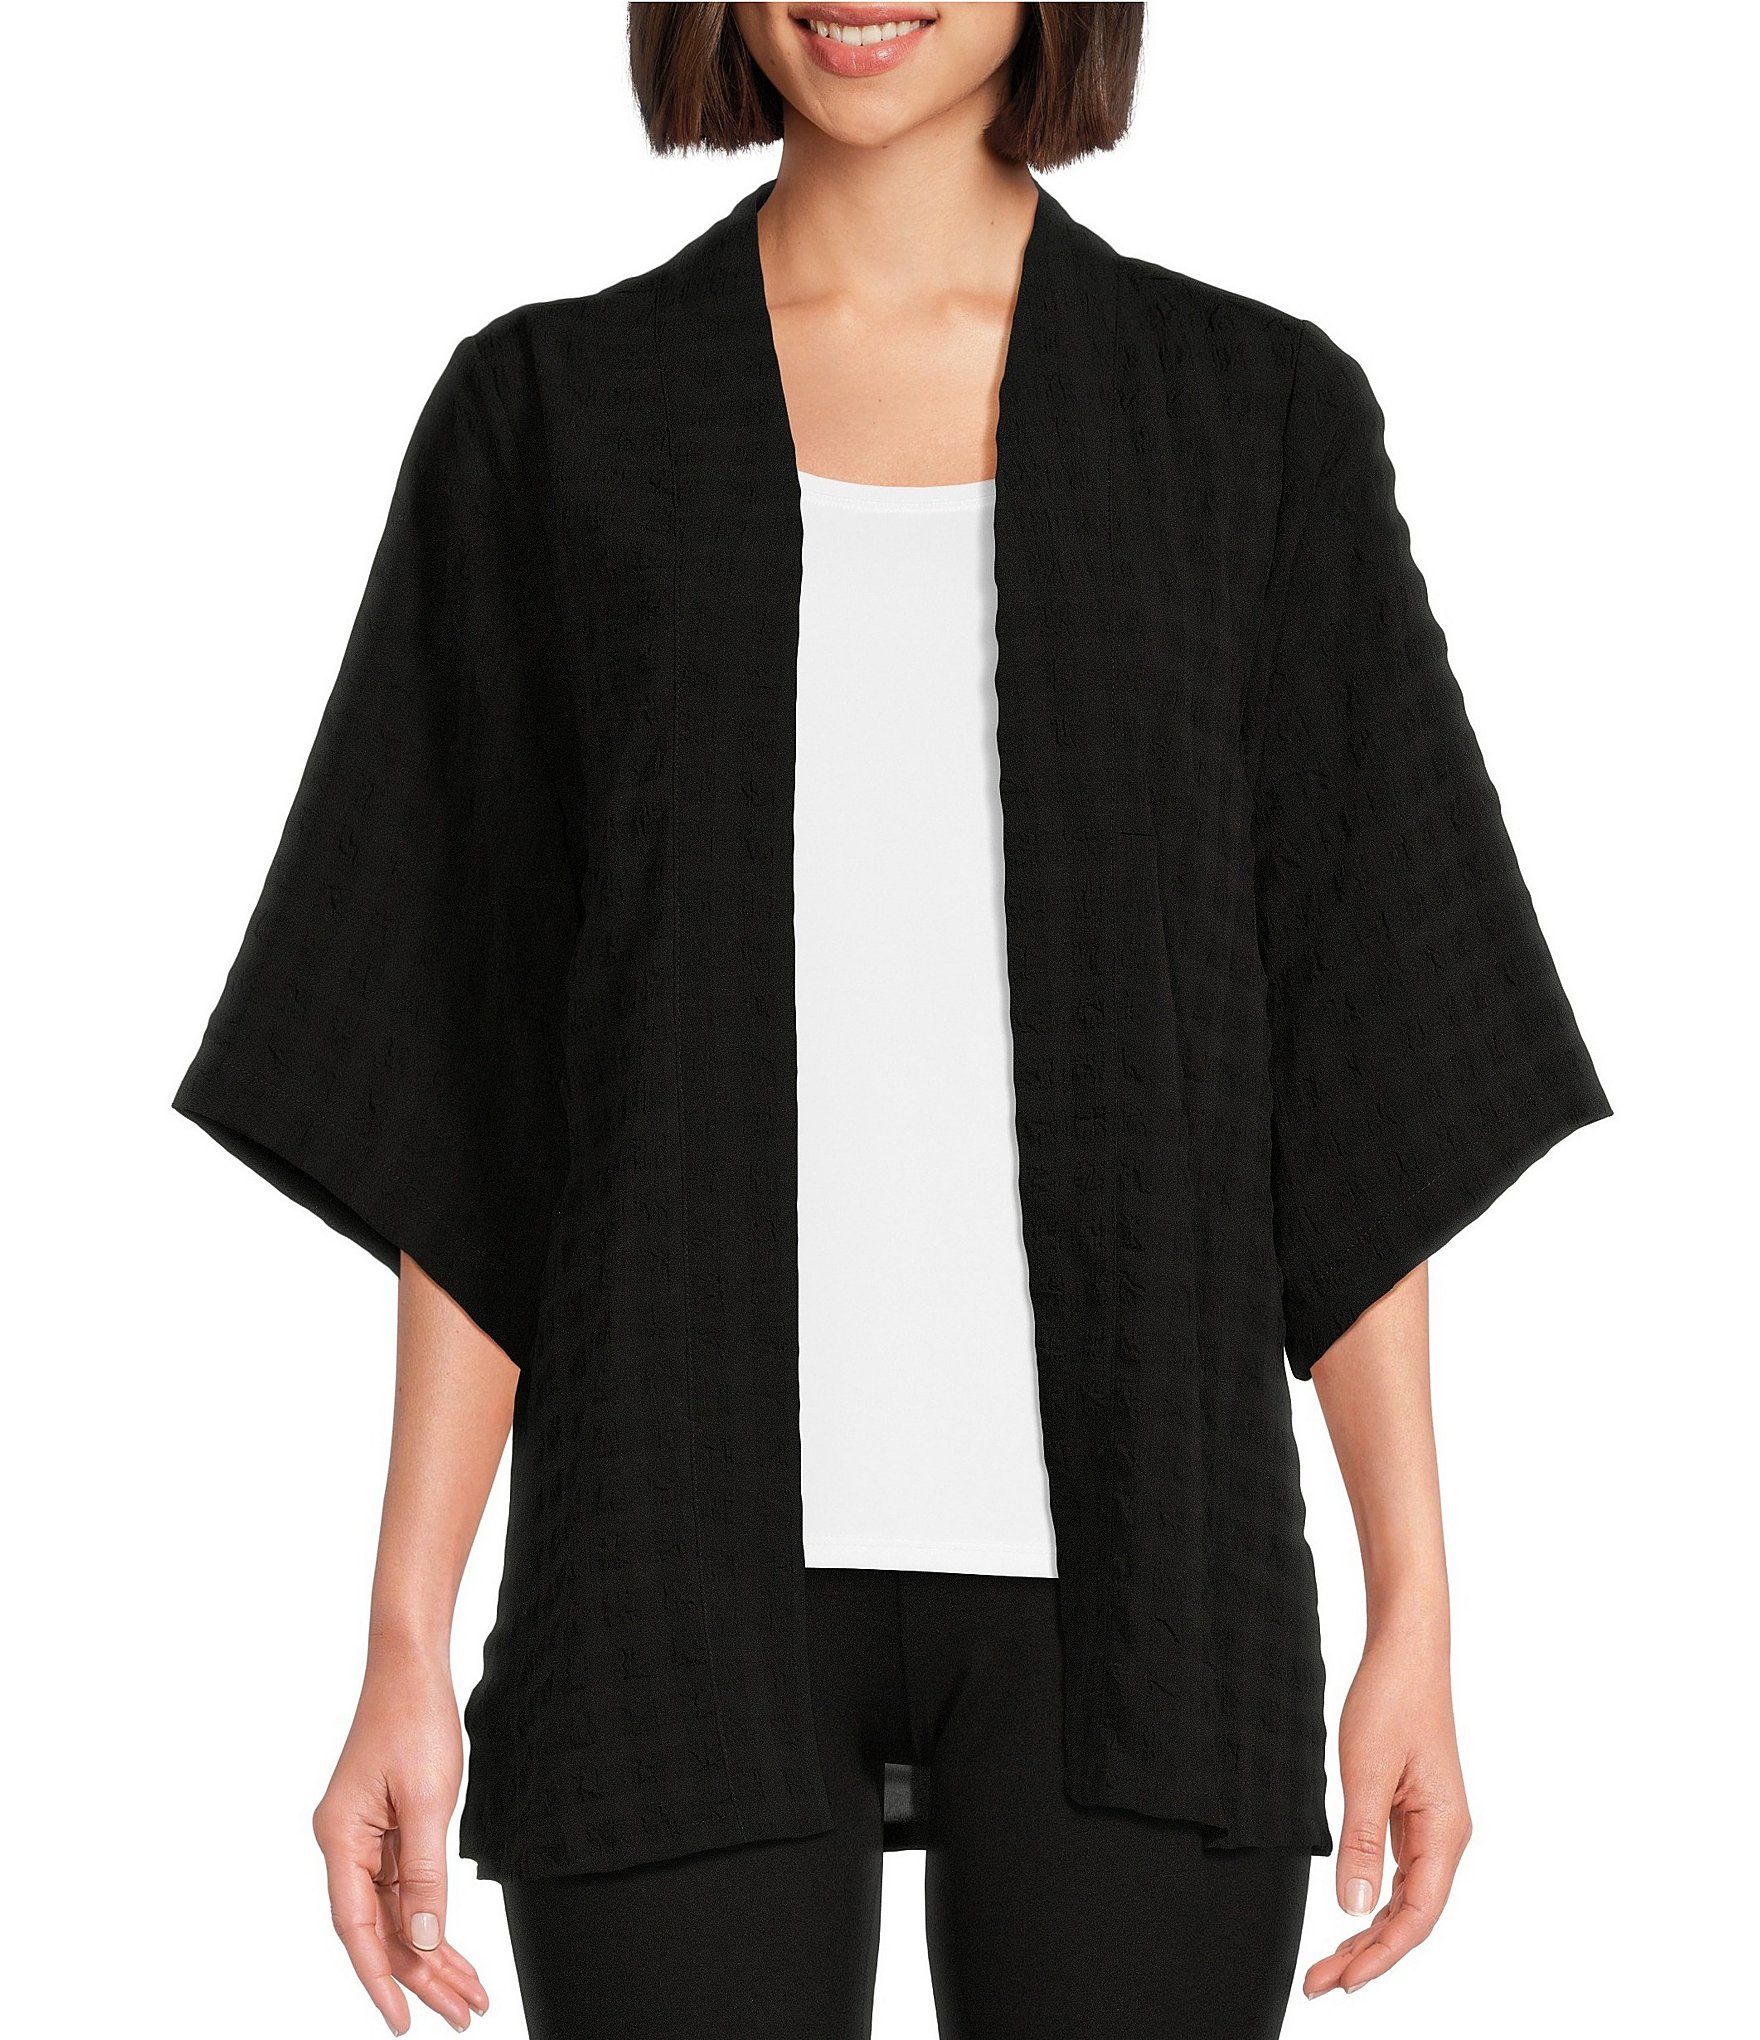 SLIM FACTOR by INVESTMENTS BLACK Draped Sweater Jacket SZ L